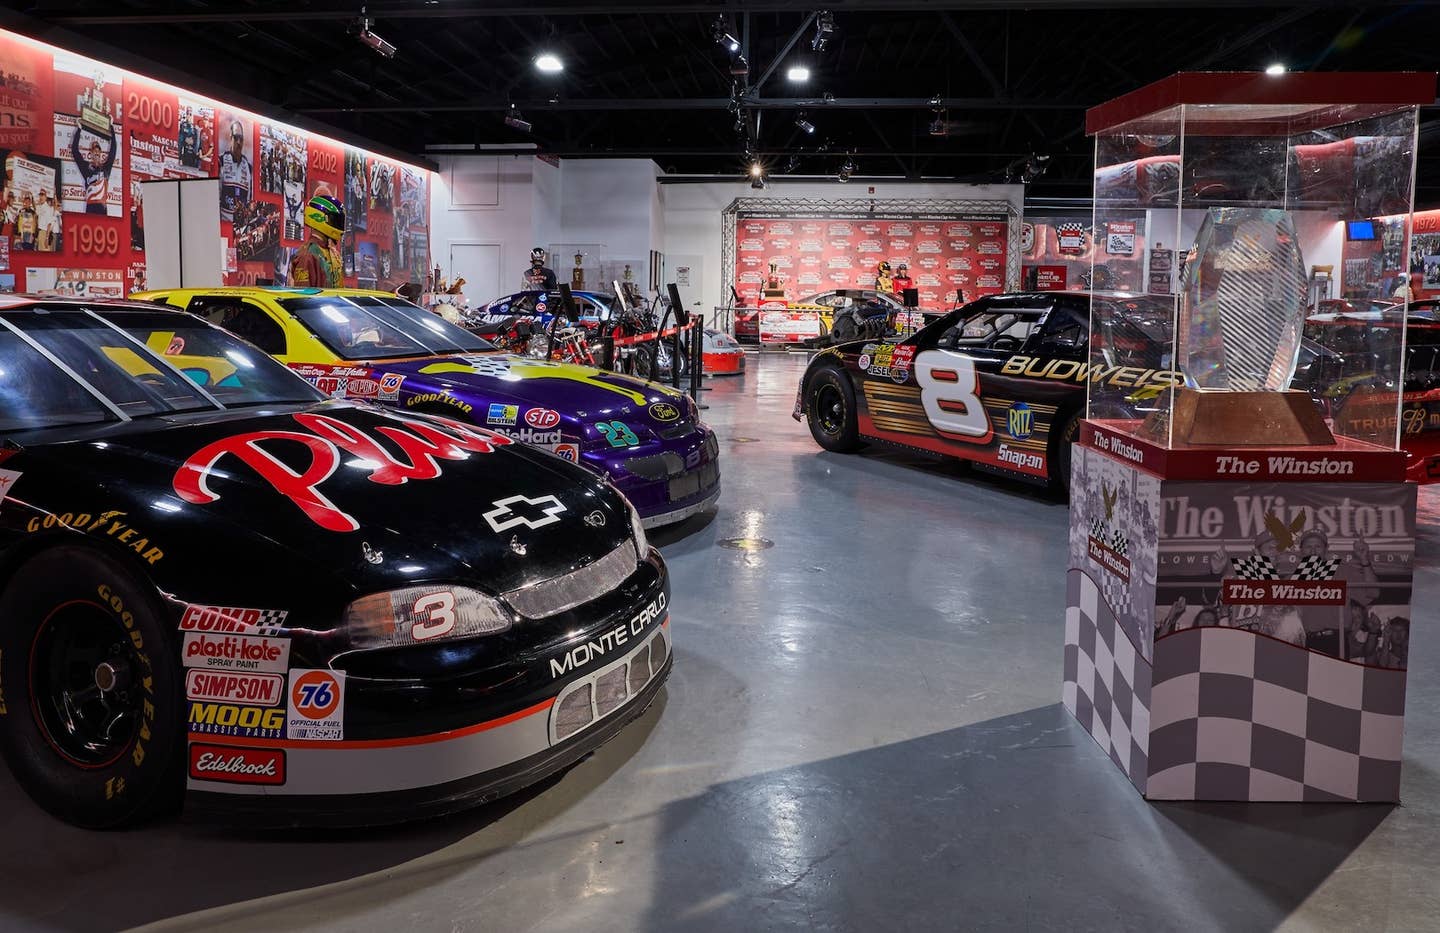 On the floor of the Winston Cup Museum